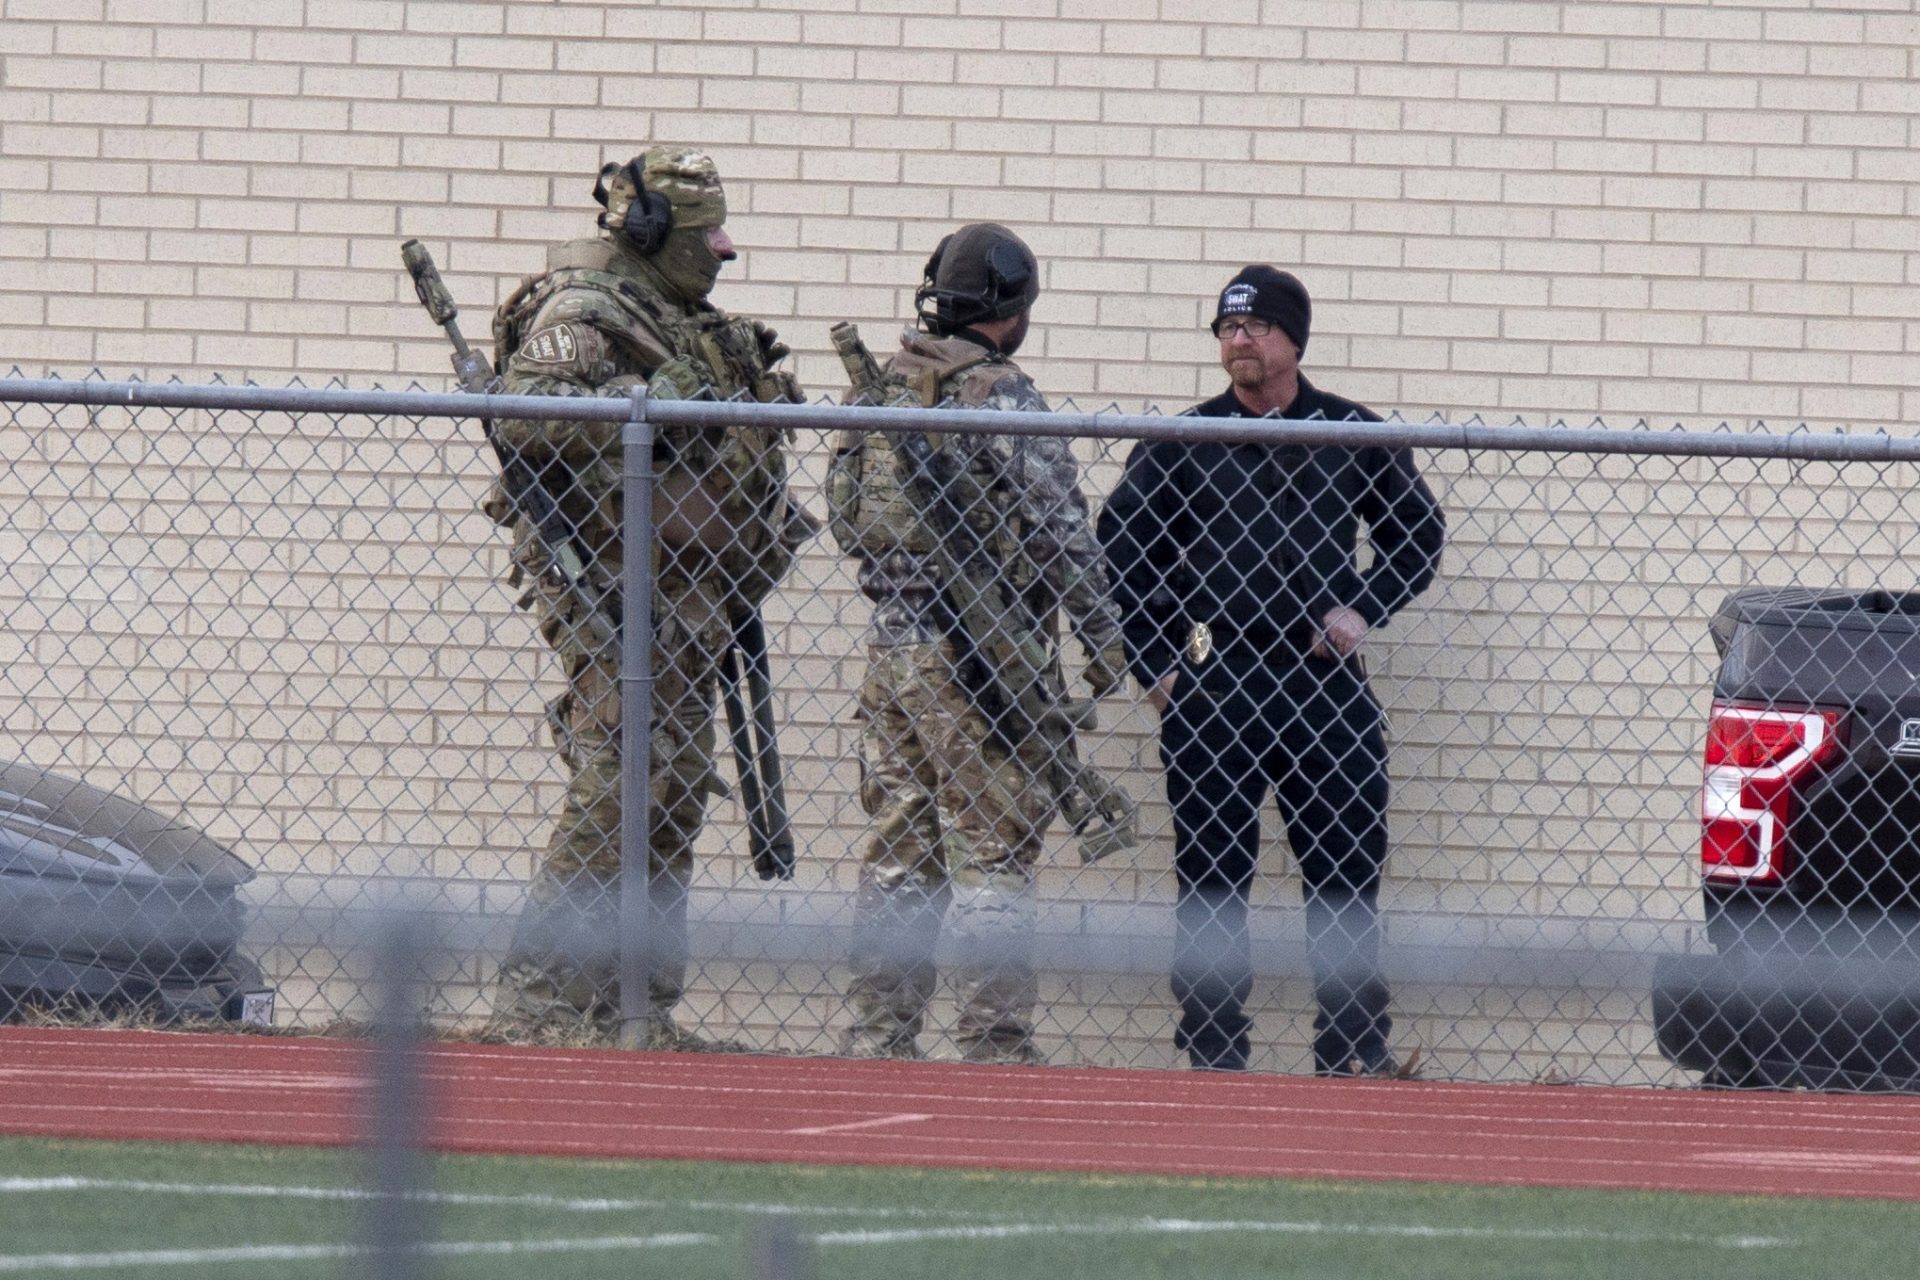 Law enforcement officials gather at a local school near the Congregation Beth Israel synagogue on Saturday, Jan. 15, 2022 in Colleyville, Texas